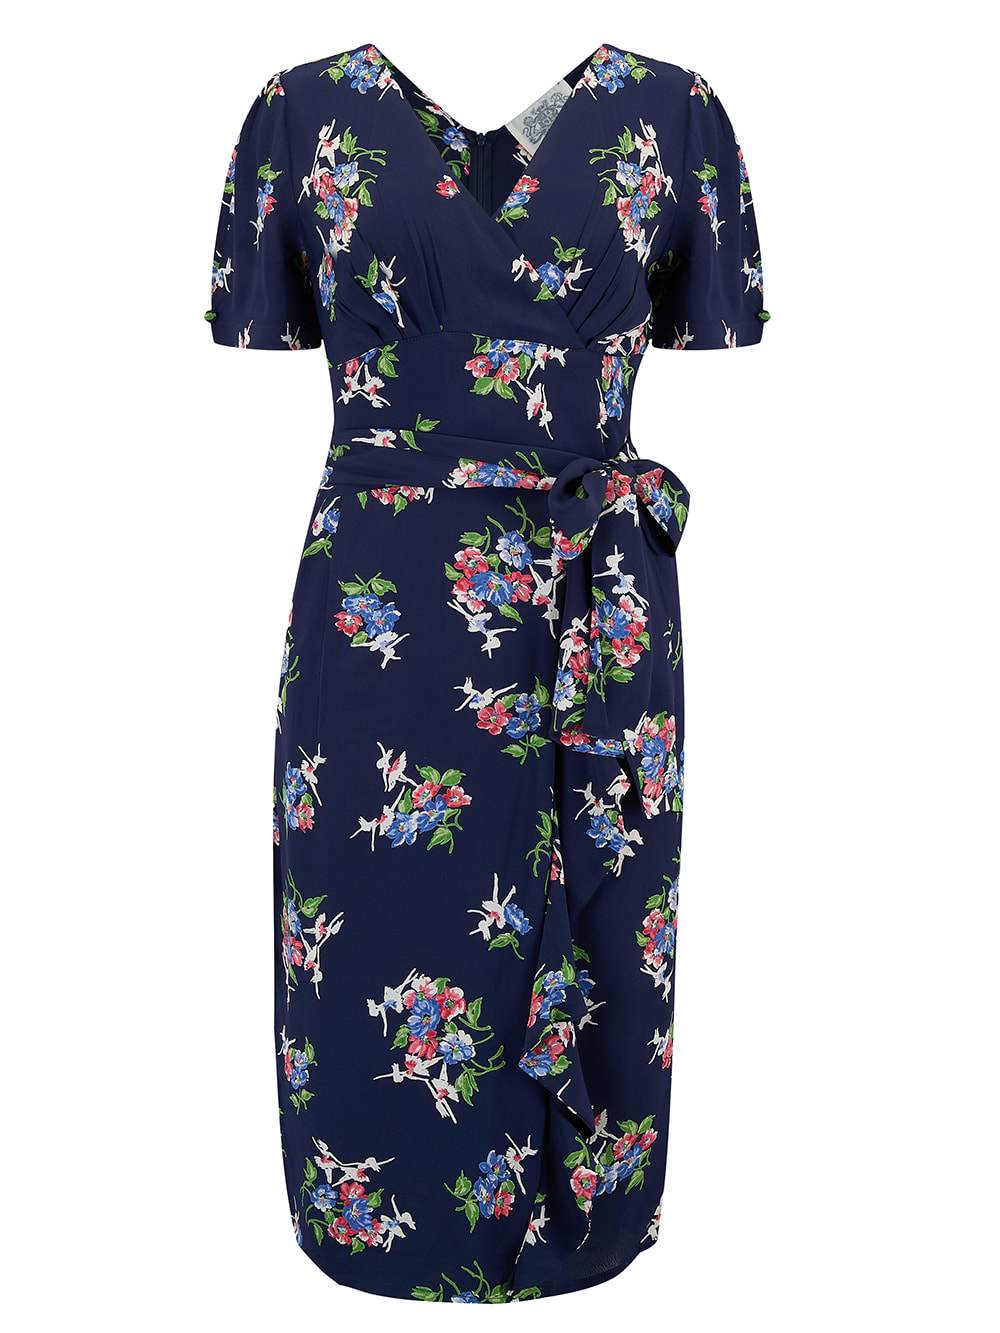 "Lilian" Dress in Navy Floral Dancer, Classic & Authentic 1940s Vintage Style - CC41, Goodwood Revival, Twinwood Festival, Viva Las Vegas Rockabilly Weekend Rock n Romance The Seamstress Of Bloomsbury